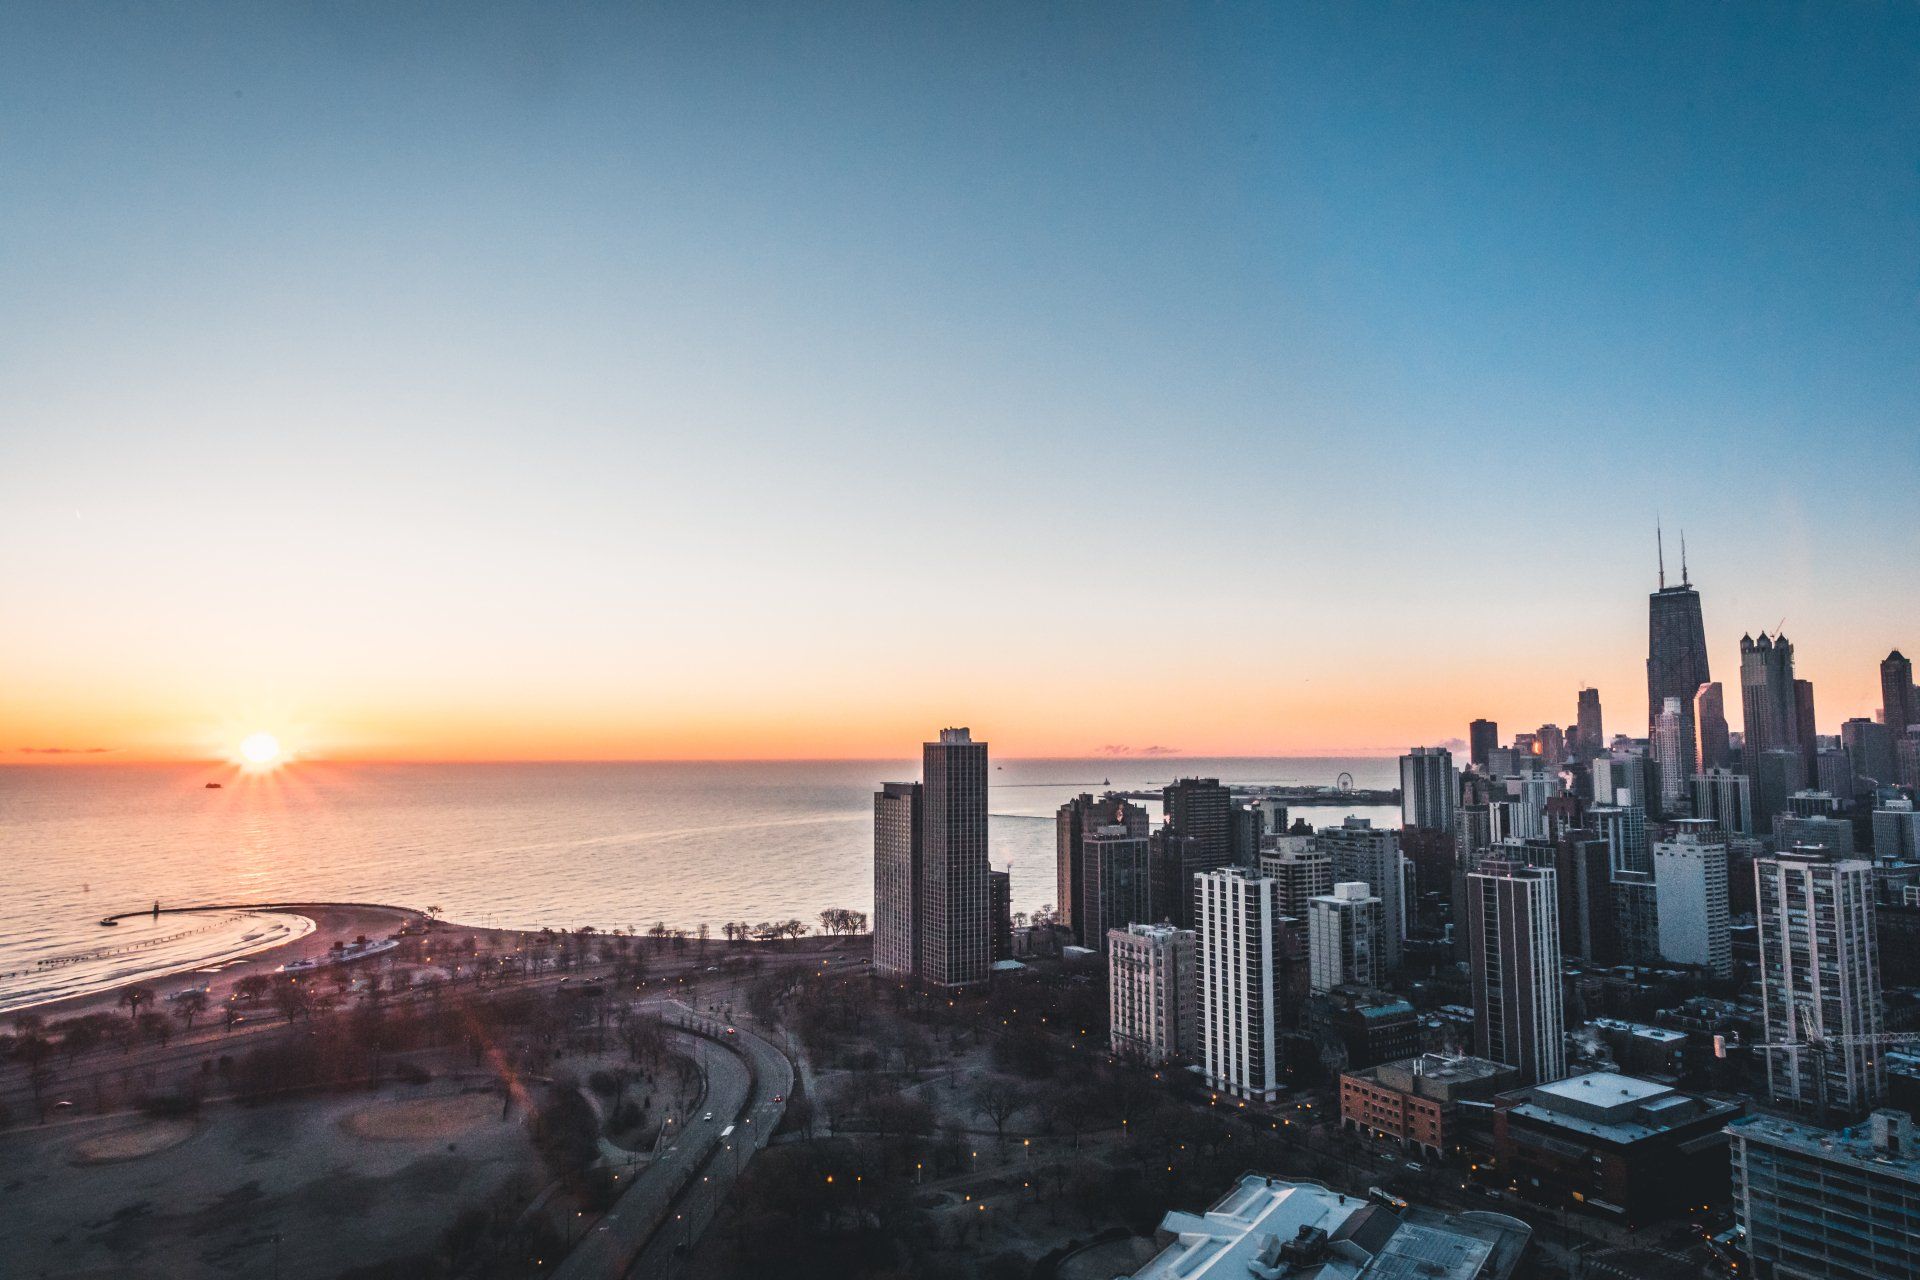 an aerial view of a city skyline at sunset overlooking the ocean .